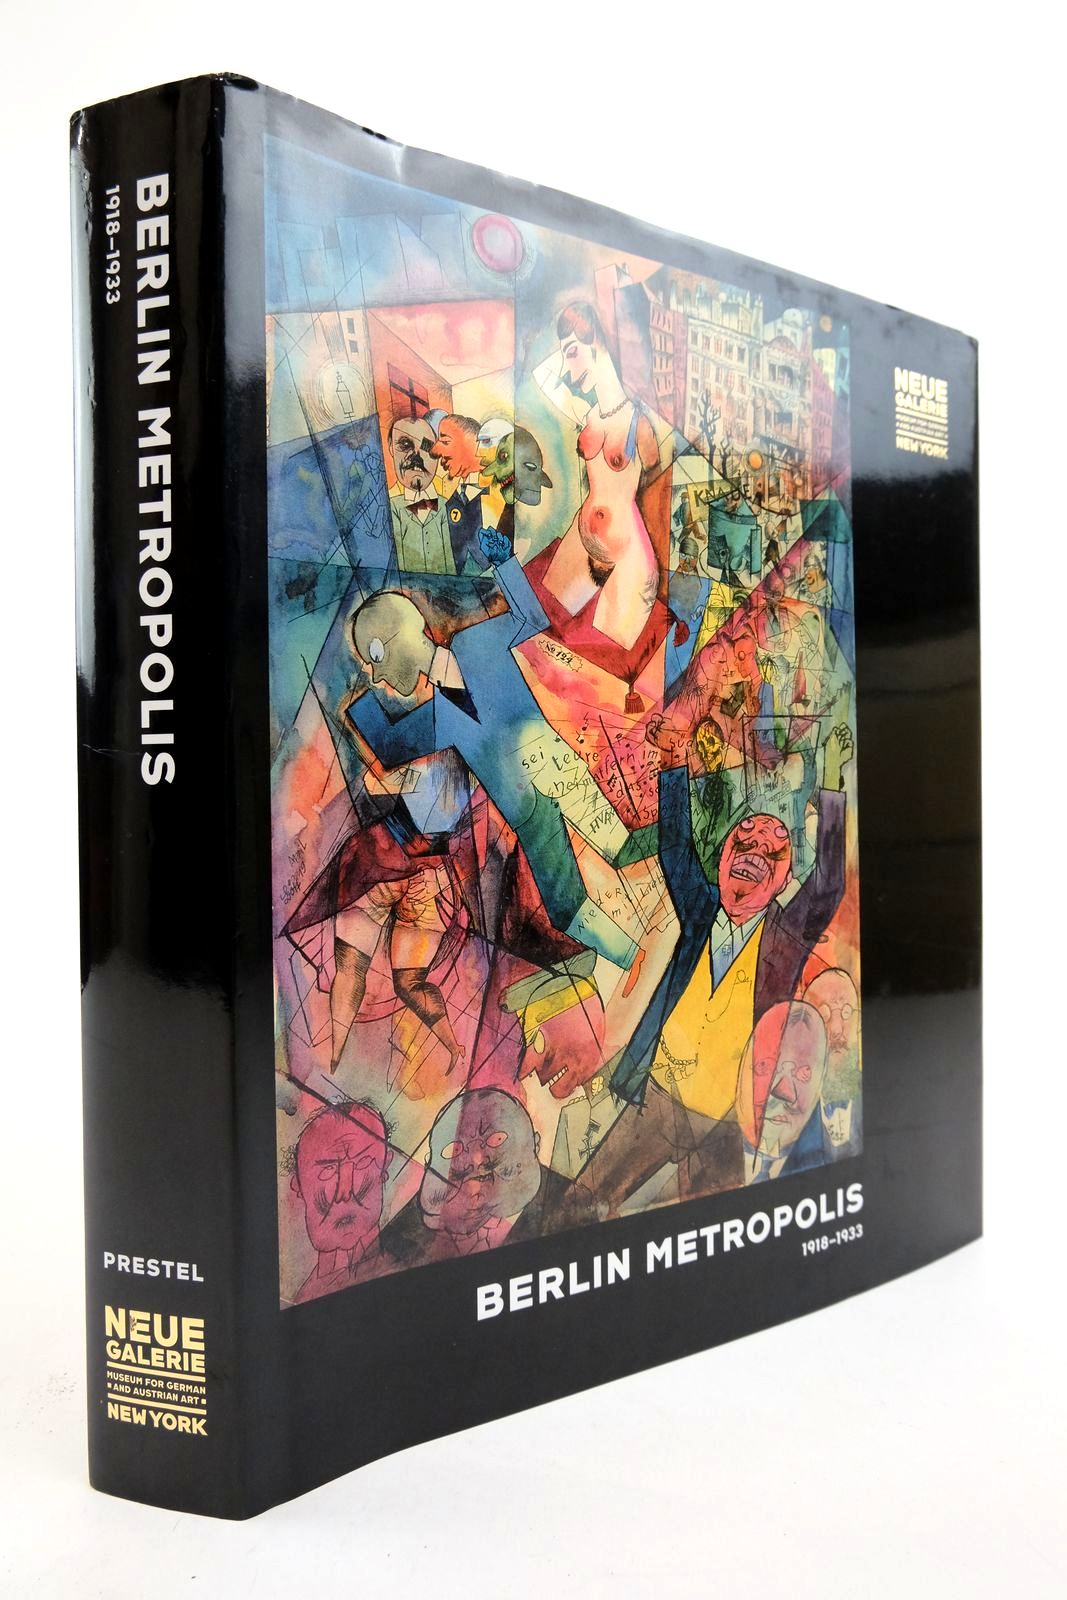 Photo of BERLIN METROPOLIS 1918-1933 written by Peters, Olaf Lauder, Ronald D. Price, Renee et al, published by Prestel (STOCK CODE: 2139033)  for sale by Stella & Rose's Books